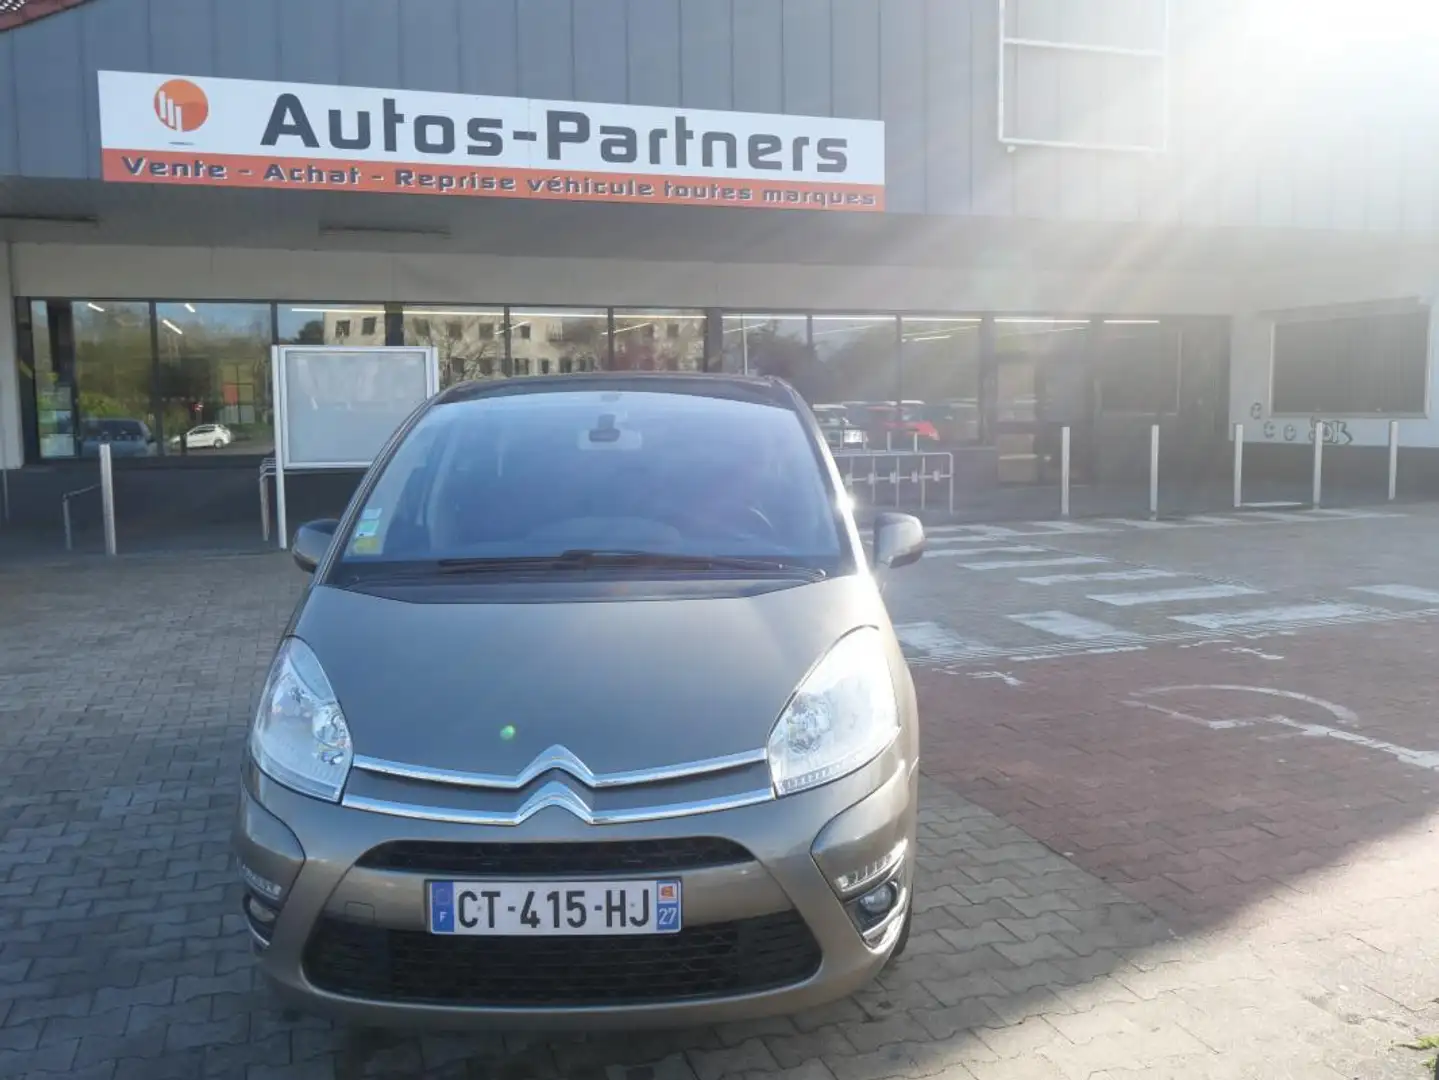 Citroen C4 Picasso 1.6 HDI - 8V TURBO Beżowy - 1